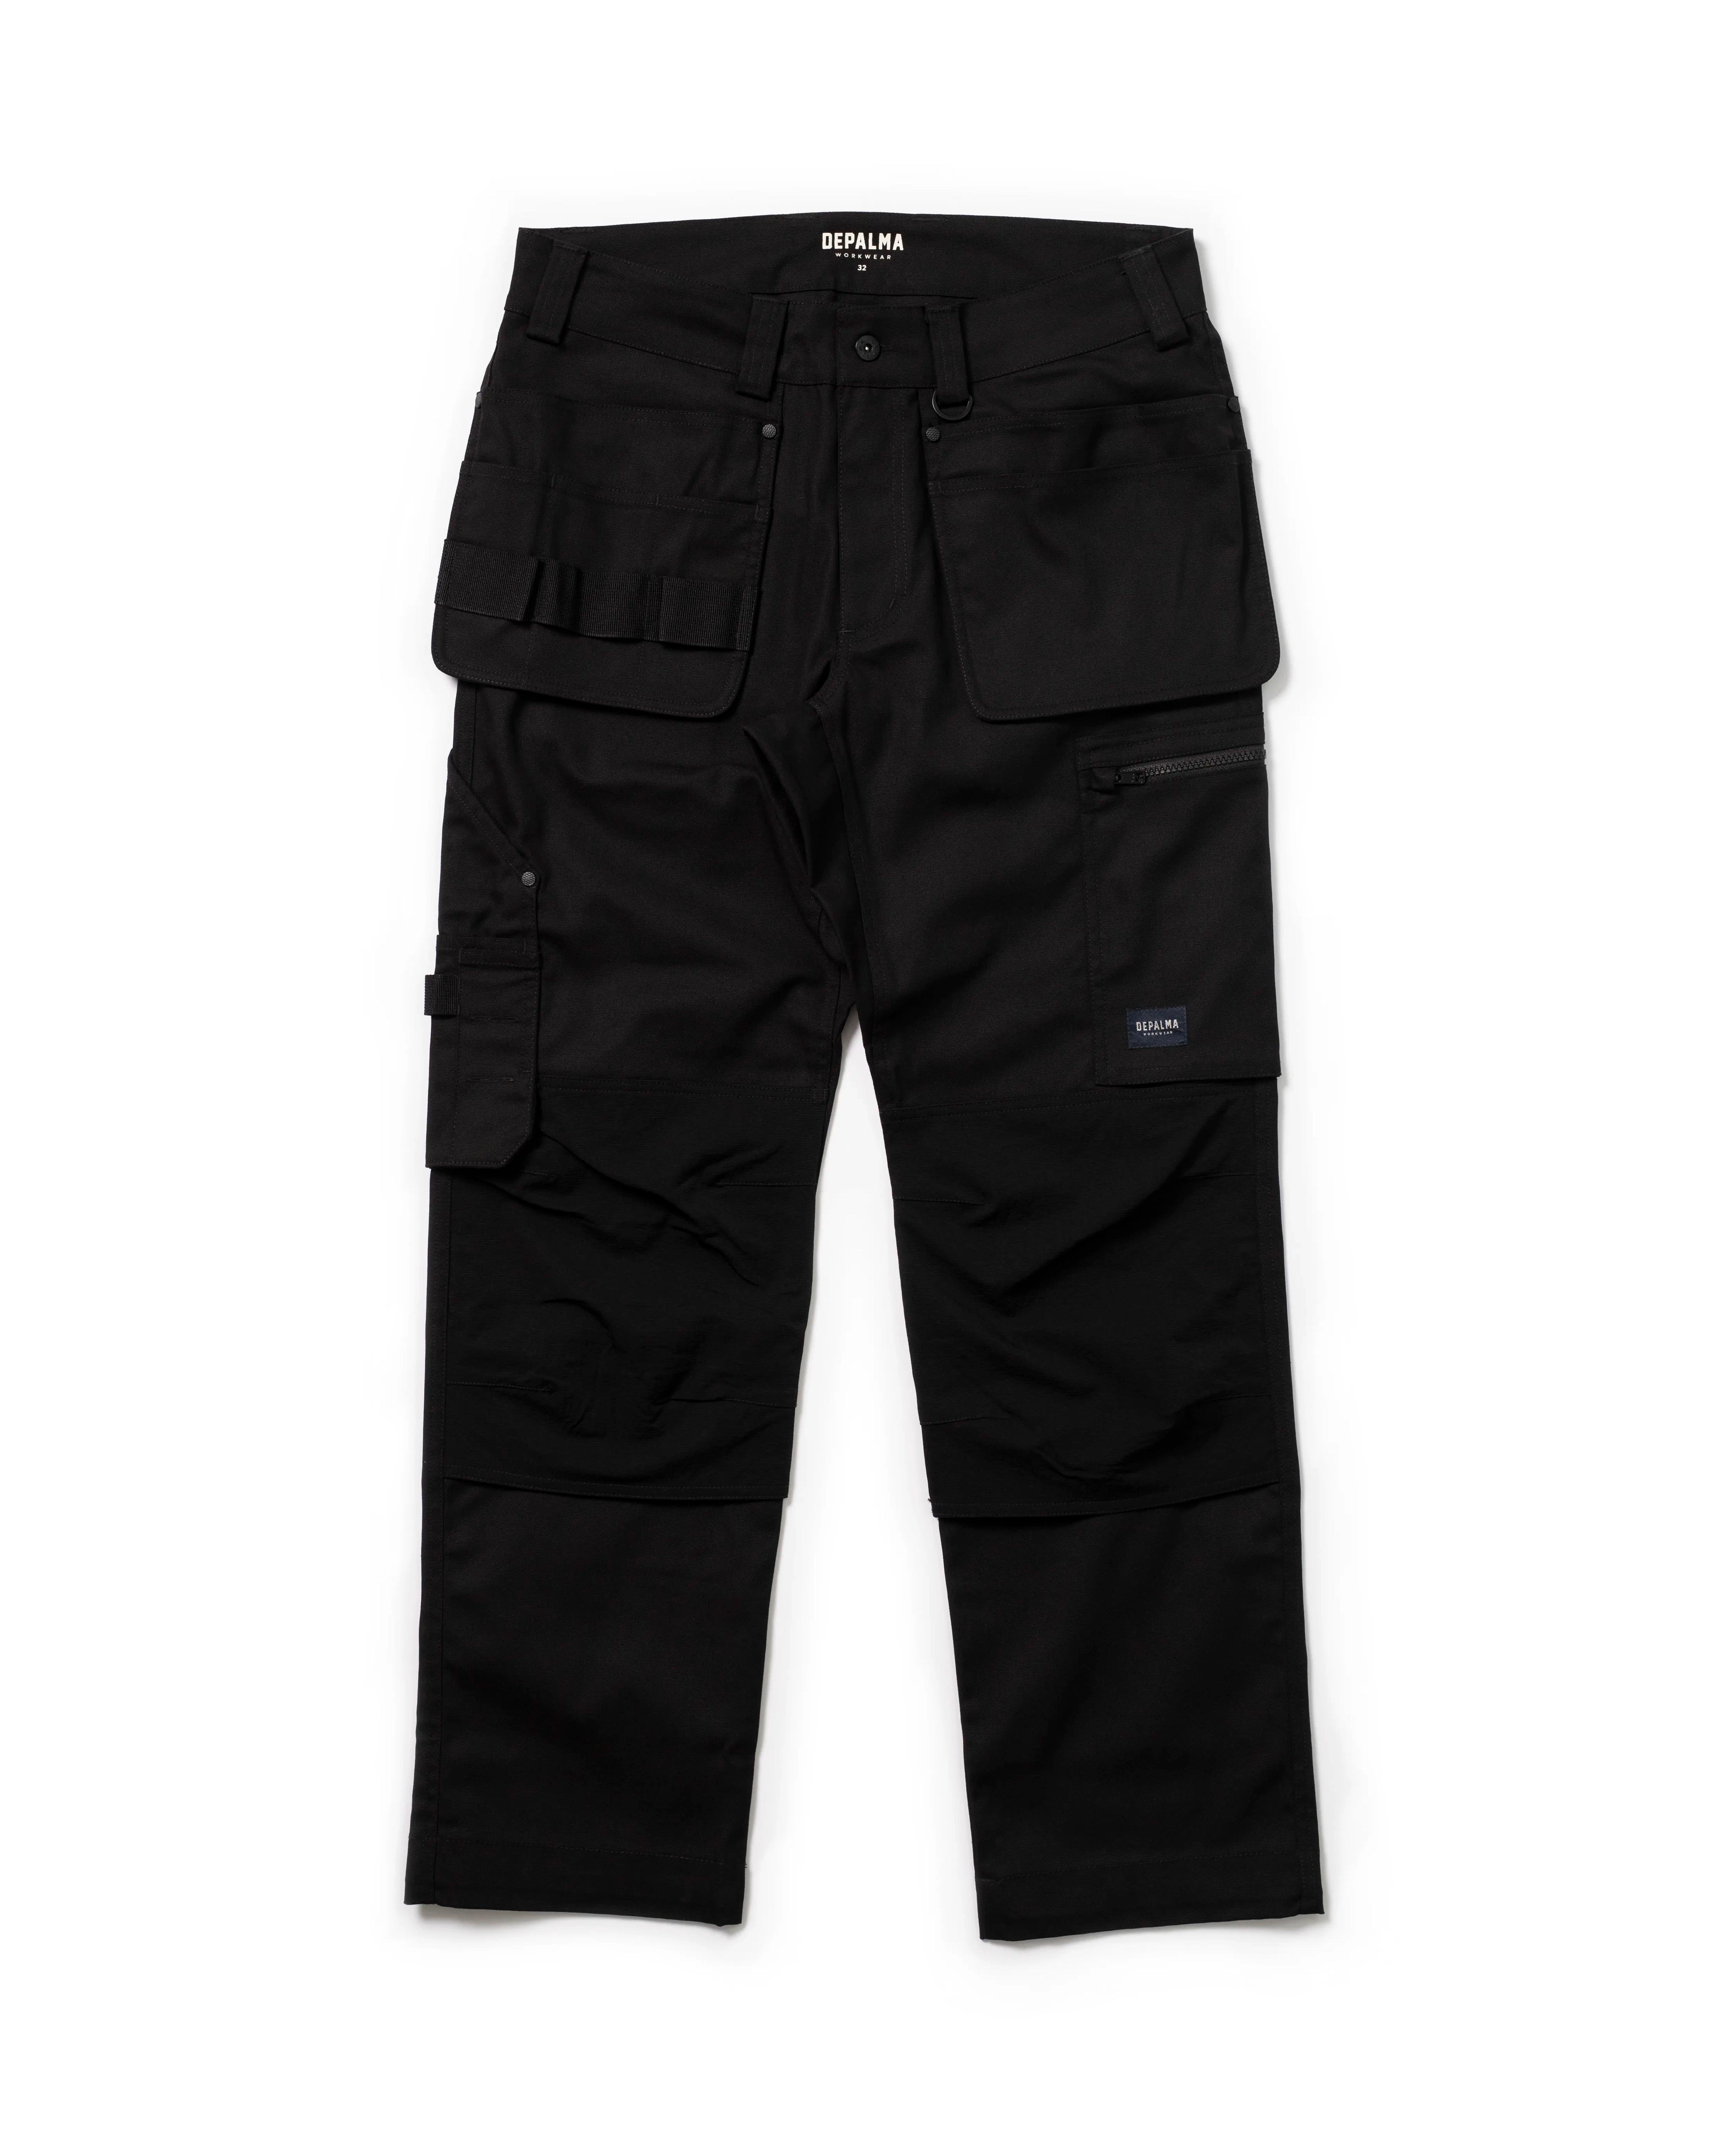 Photo of Grafter Work Pants, Black